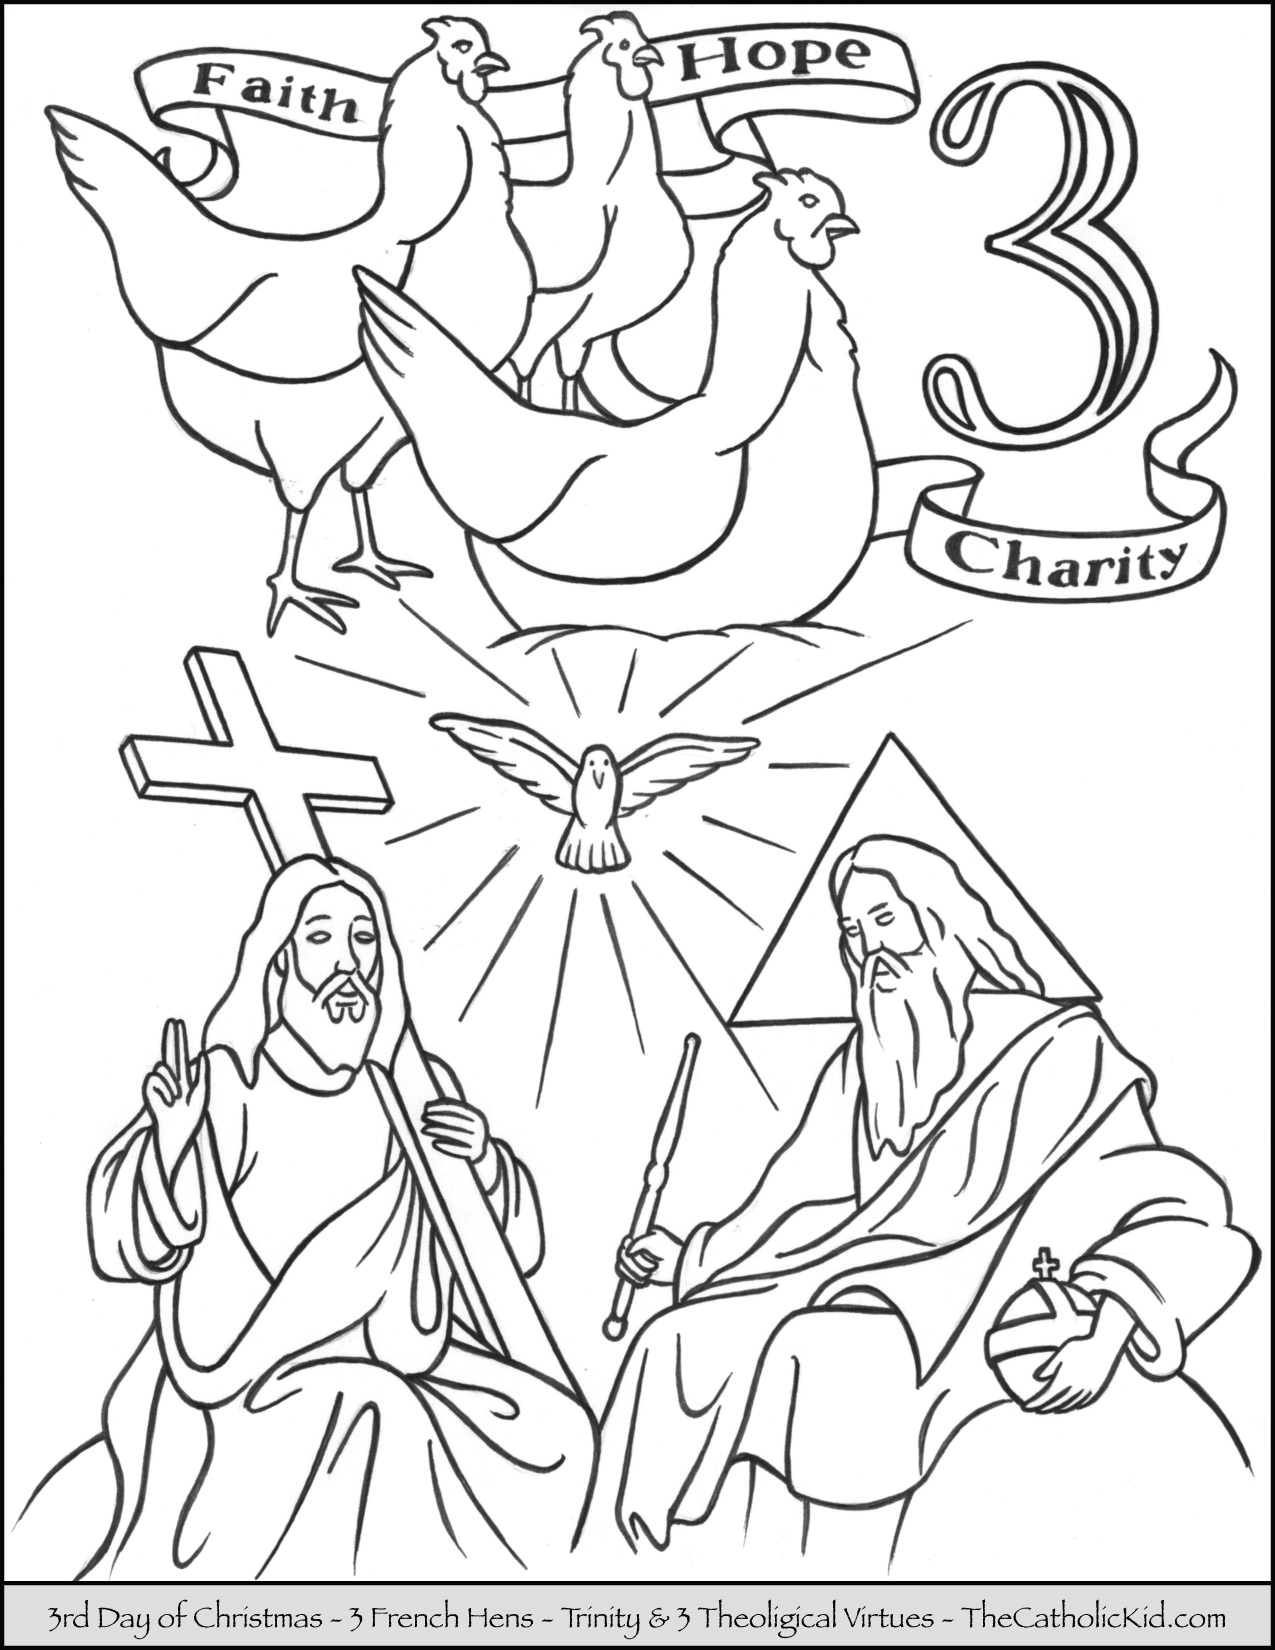 Twelve Days Of Christmas Coloring Pages Free at GetColorings.com | Free